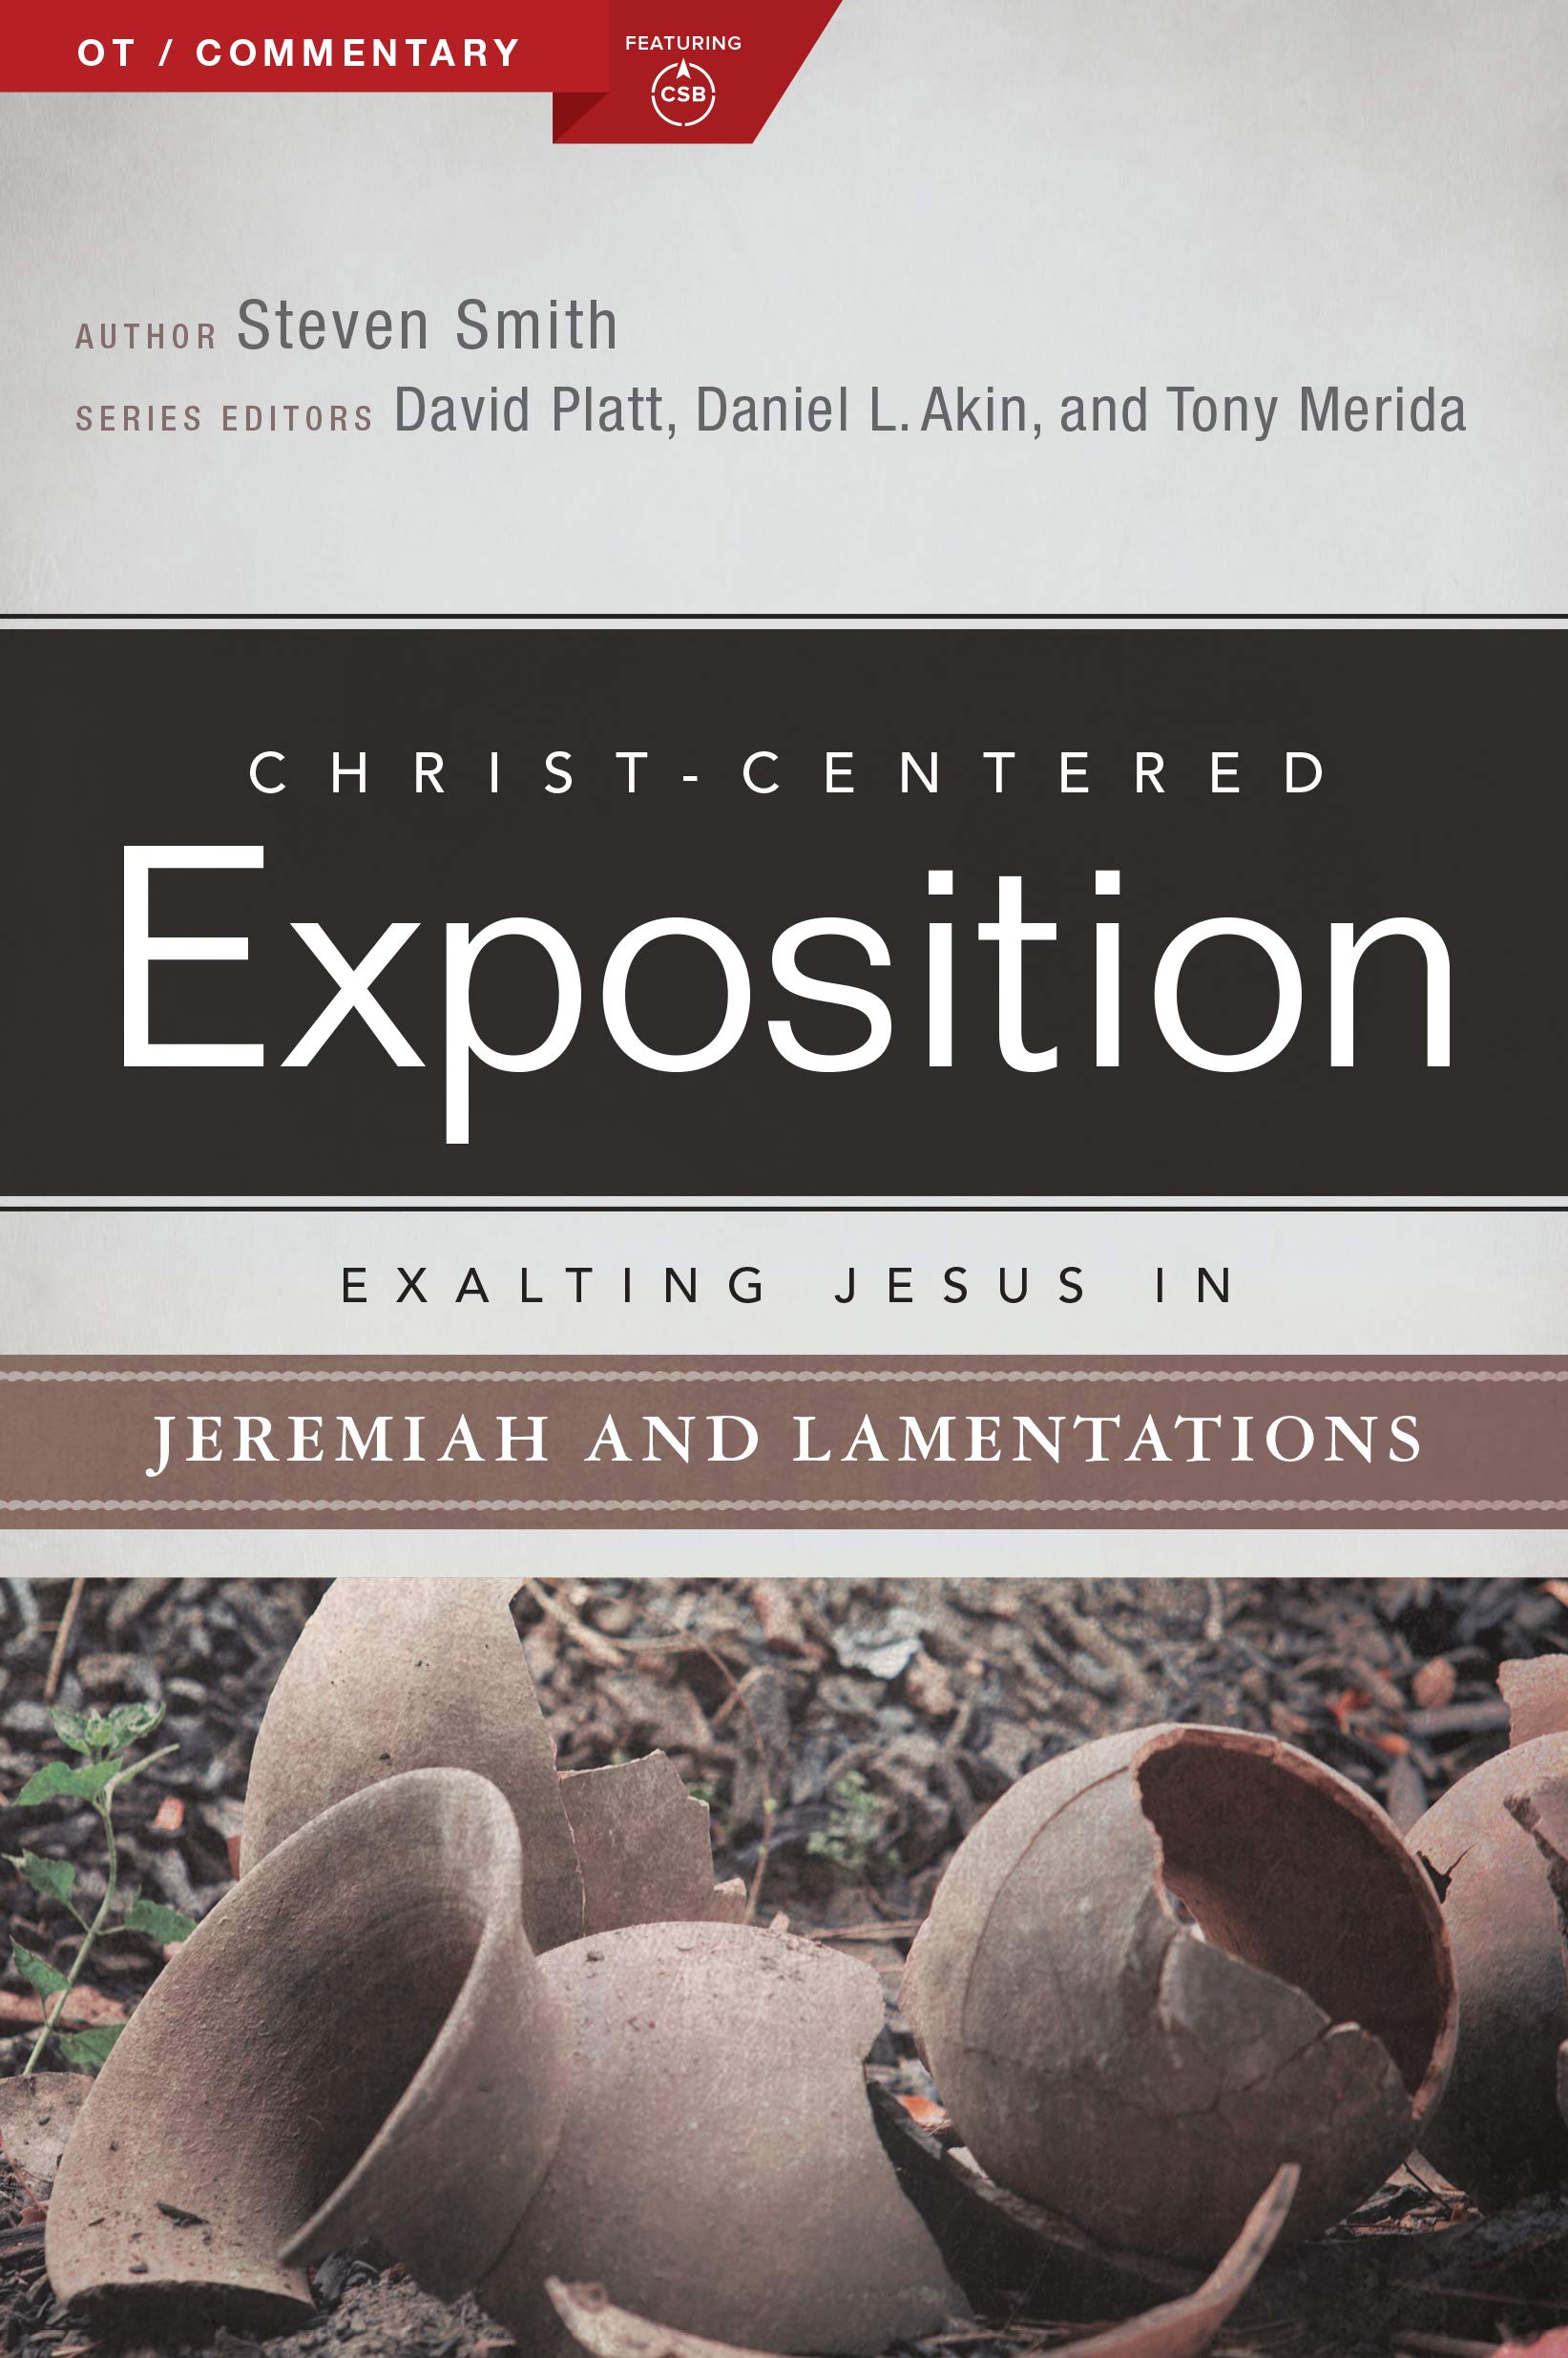 Exalting Jesus in Jeremiah, Lamentations (Christ-Centered Exposition Commentary)